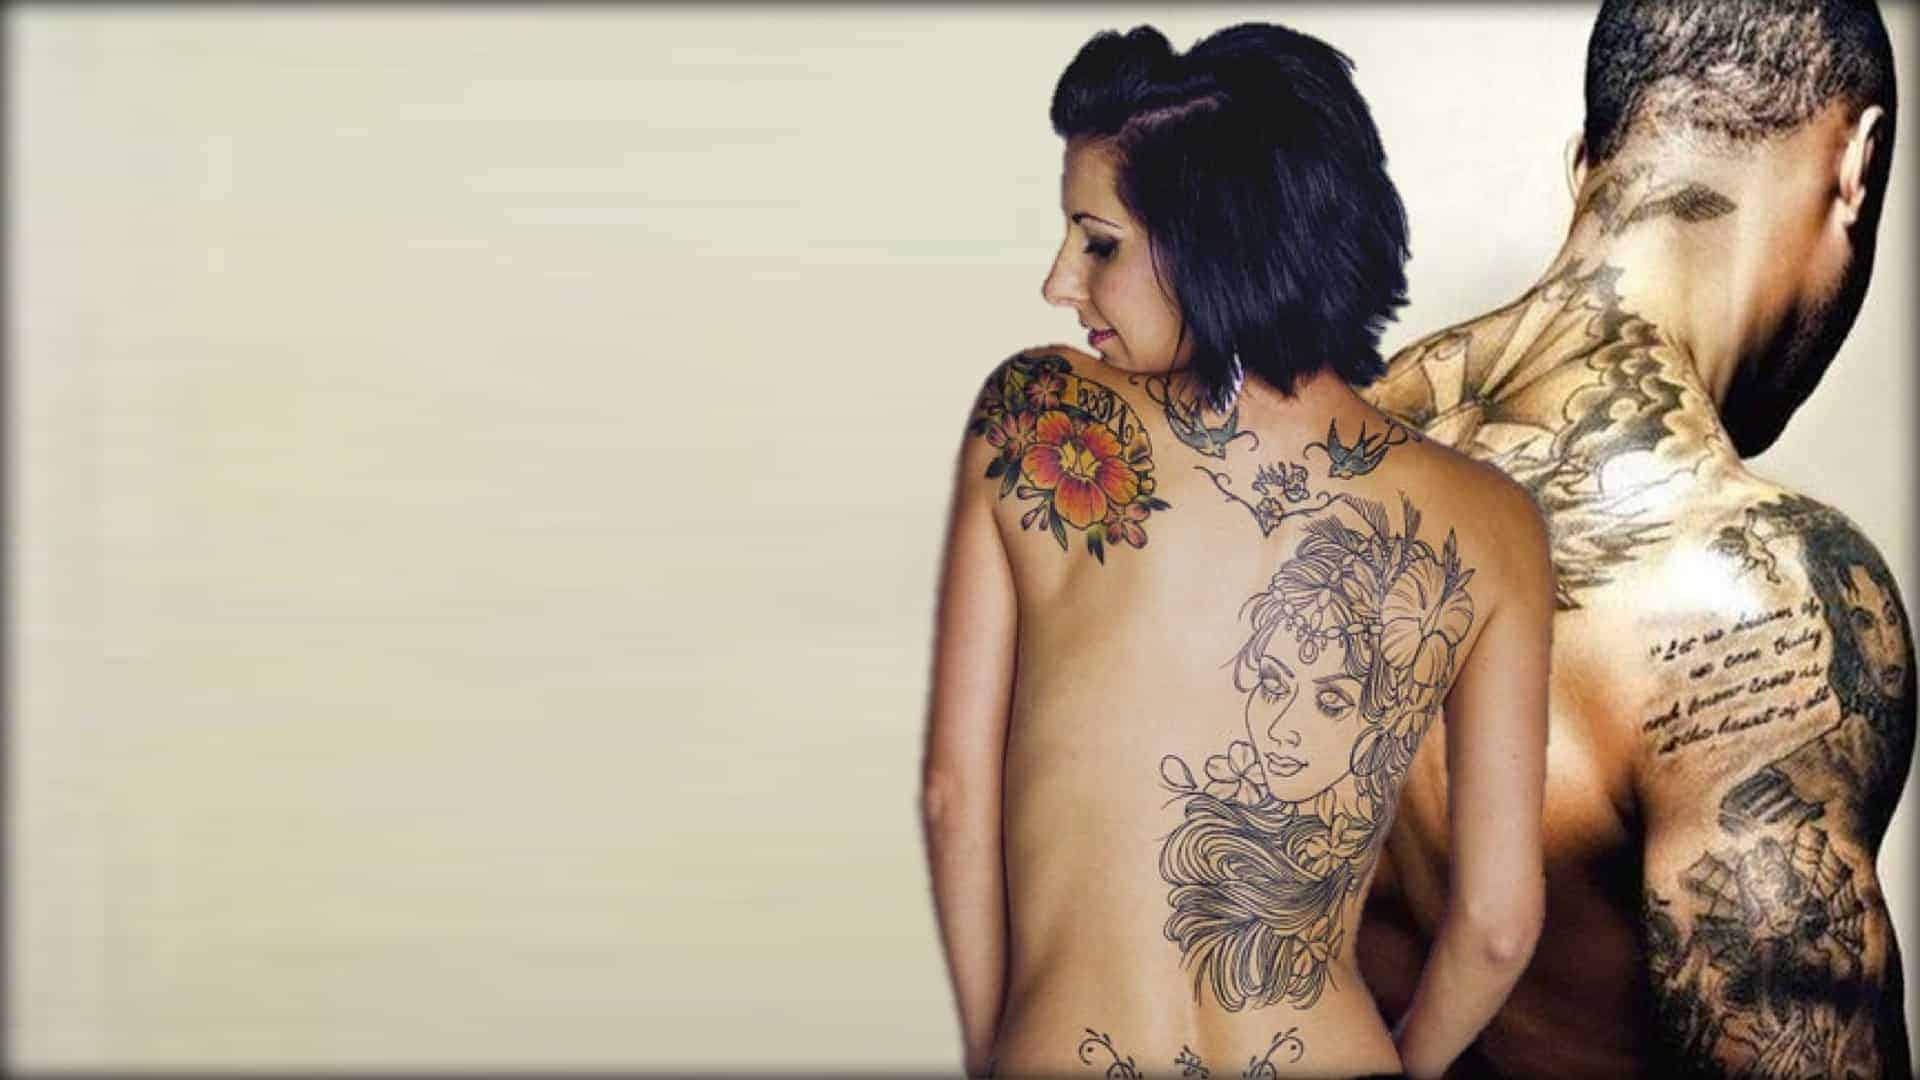 Two individuals are shown with their backs turned towards the camera. Both are topless. Both are displaying beautifully tattooed artwork on their backs and arms.